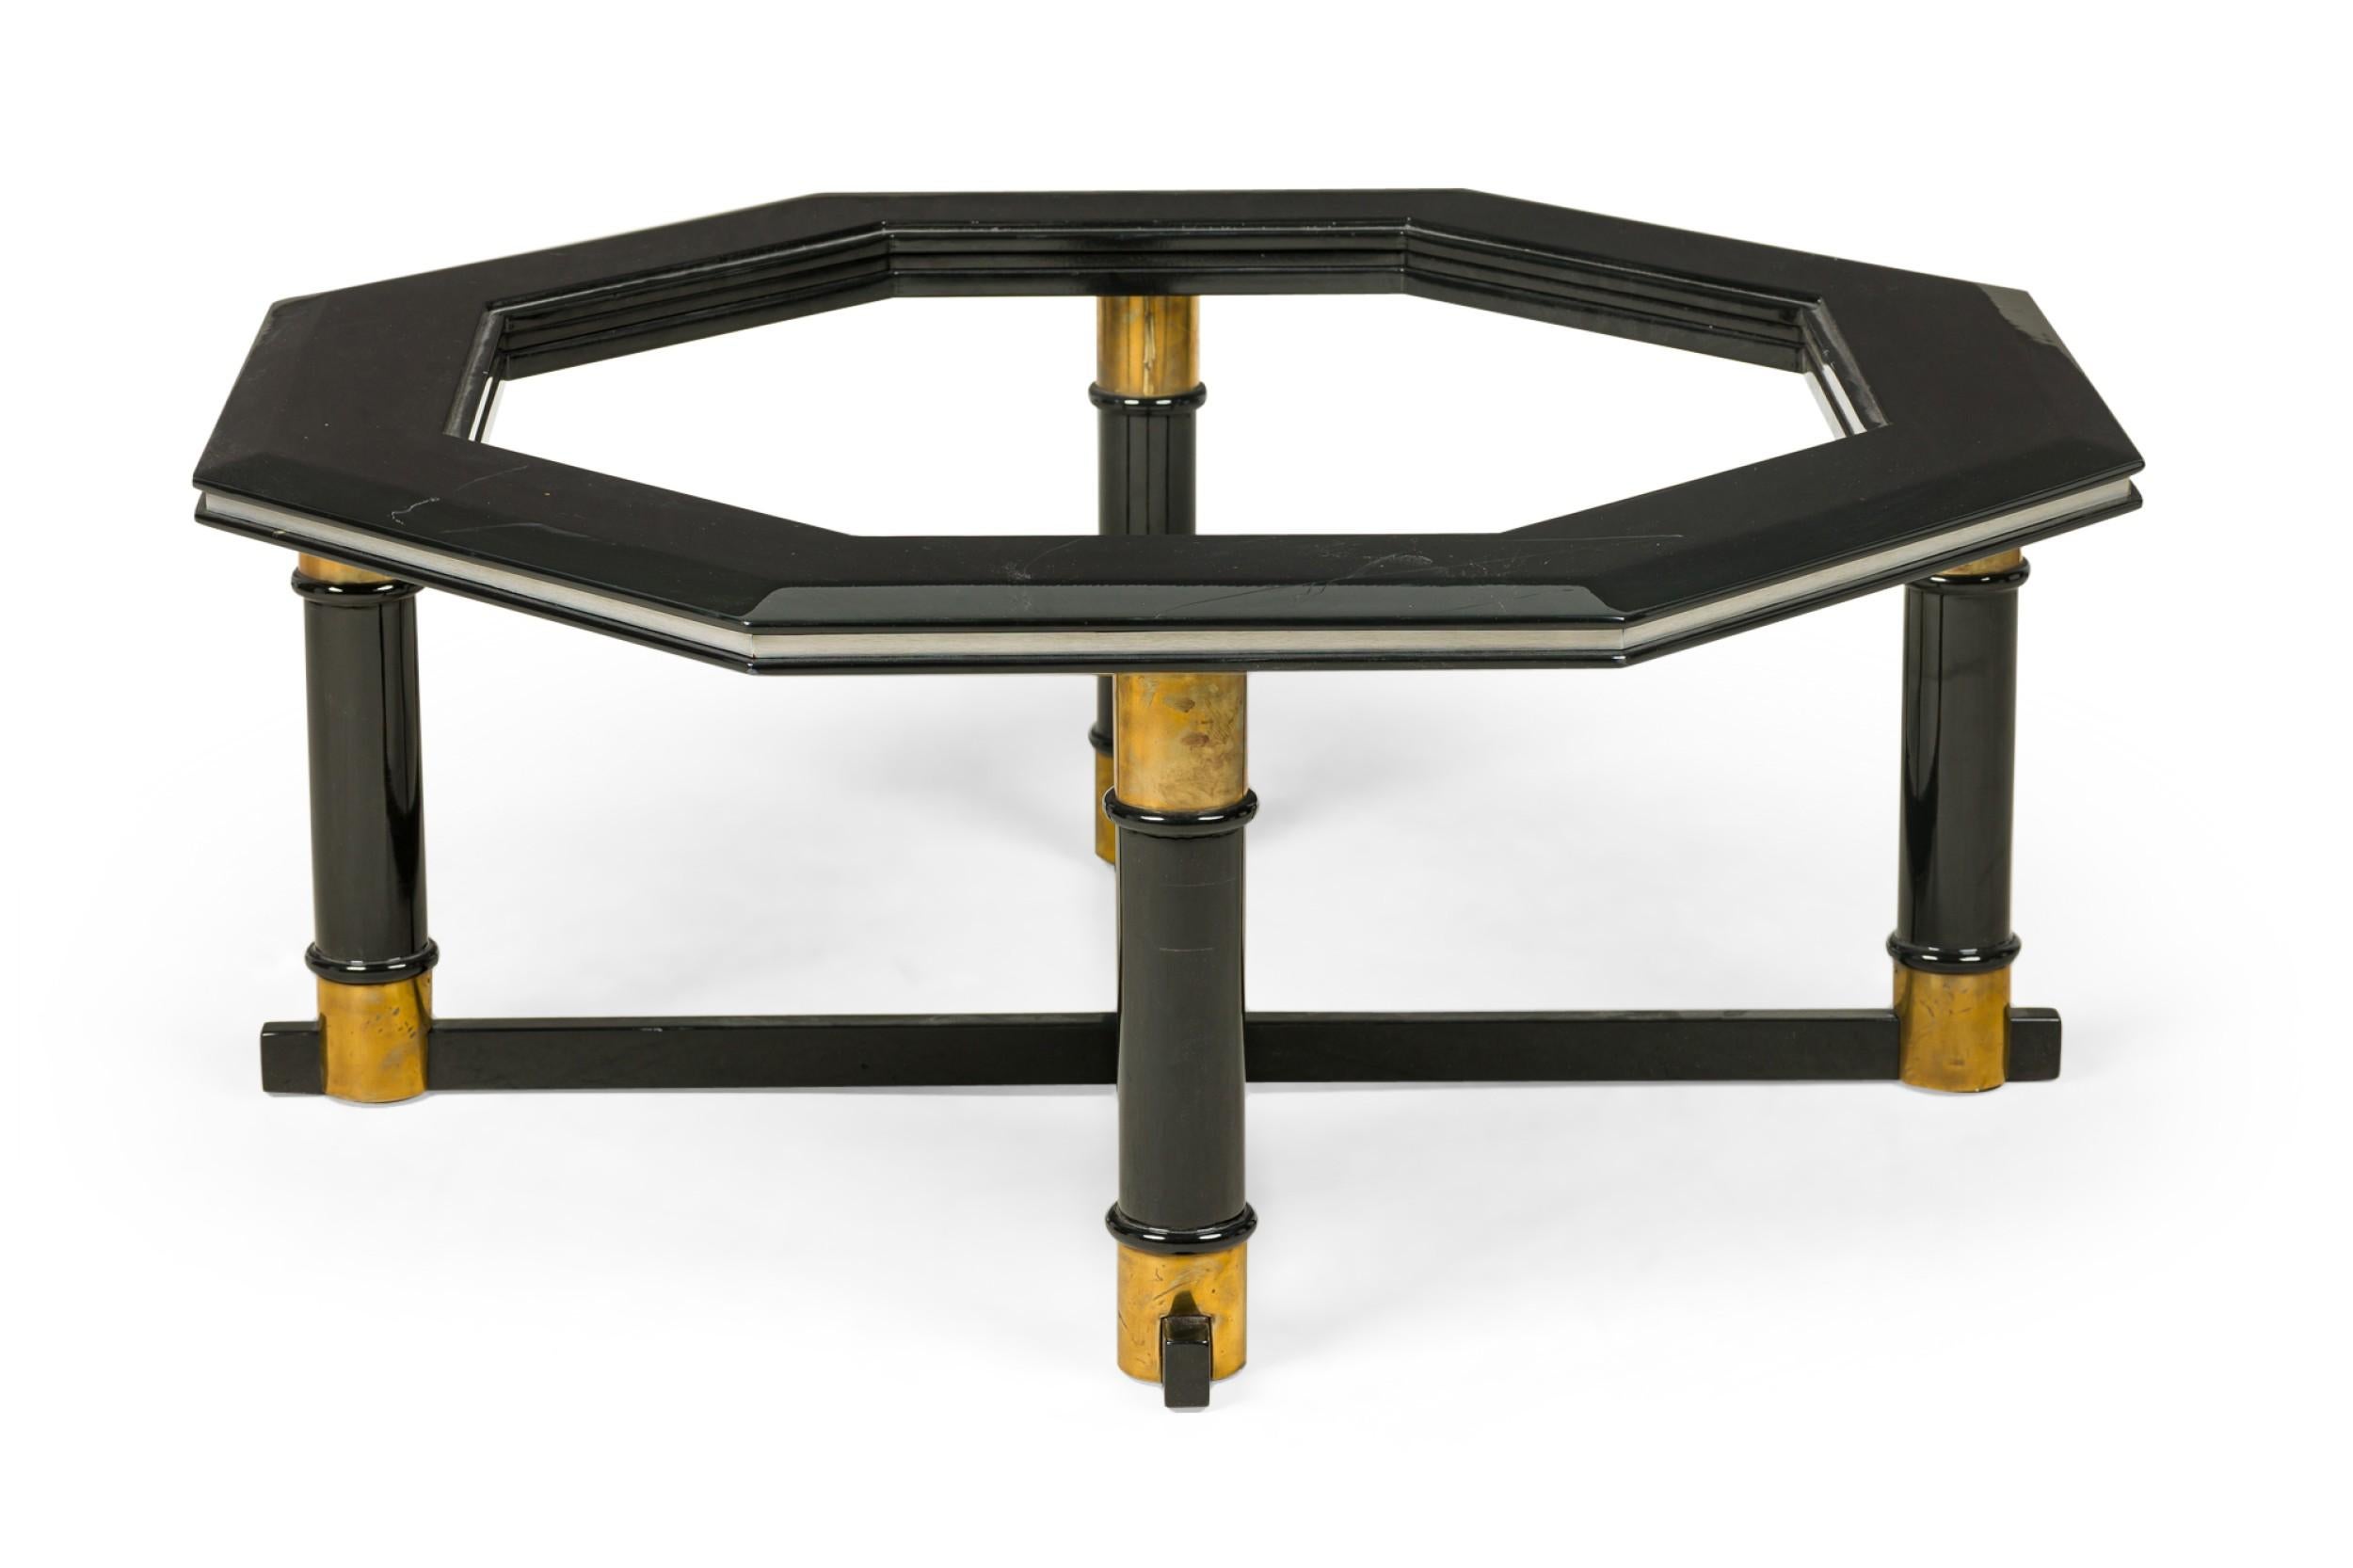 American James Mont Americna Black Lacquer and Brass Octagonal Low Coffee Table Frame For Sale